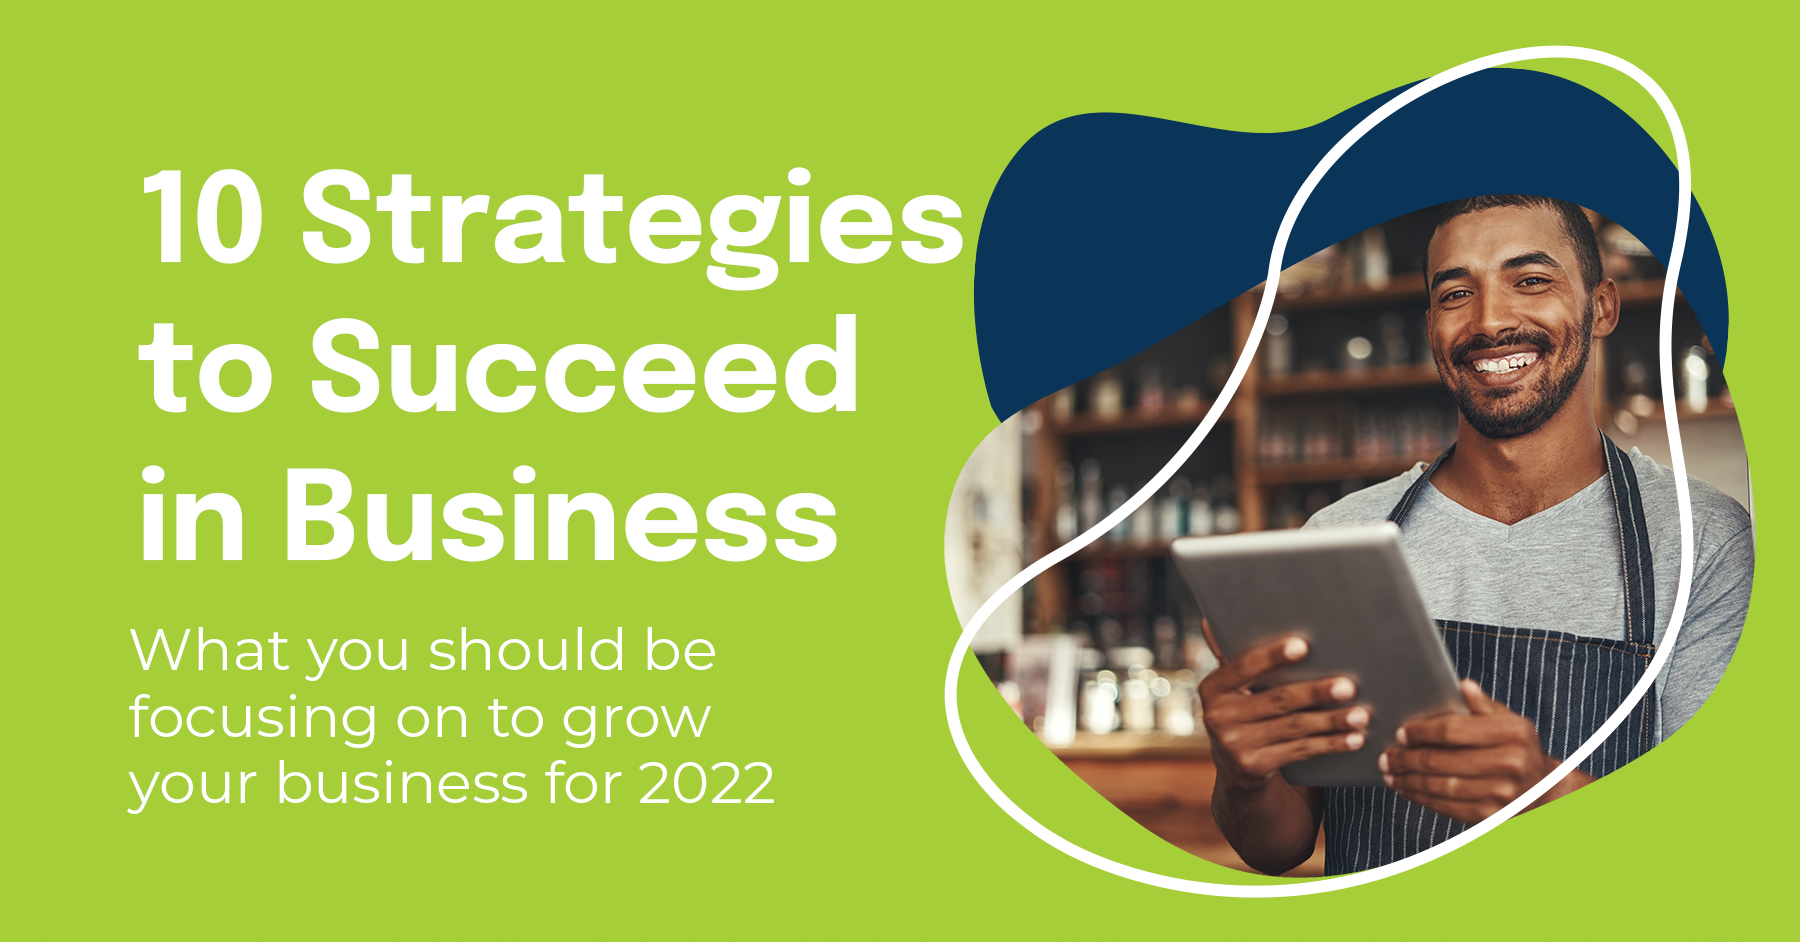 10 key strategies to succeed in business in 2022